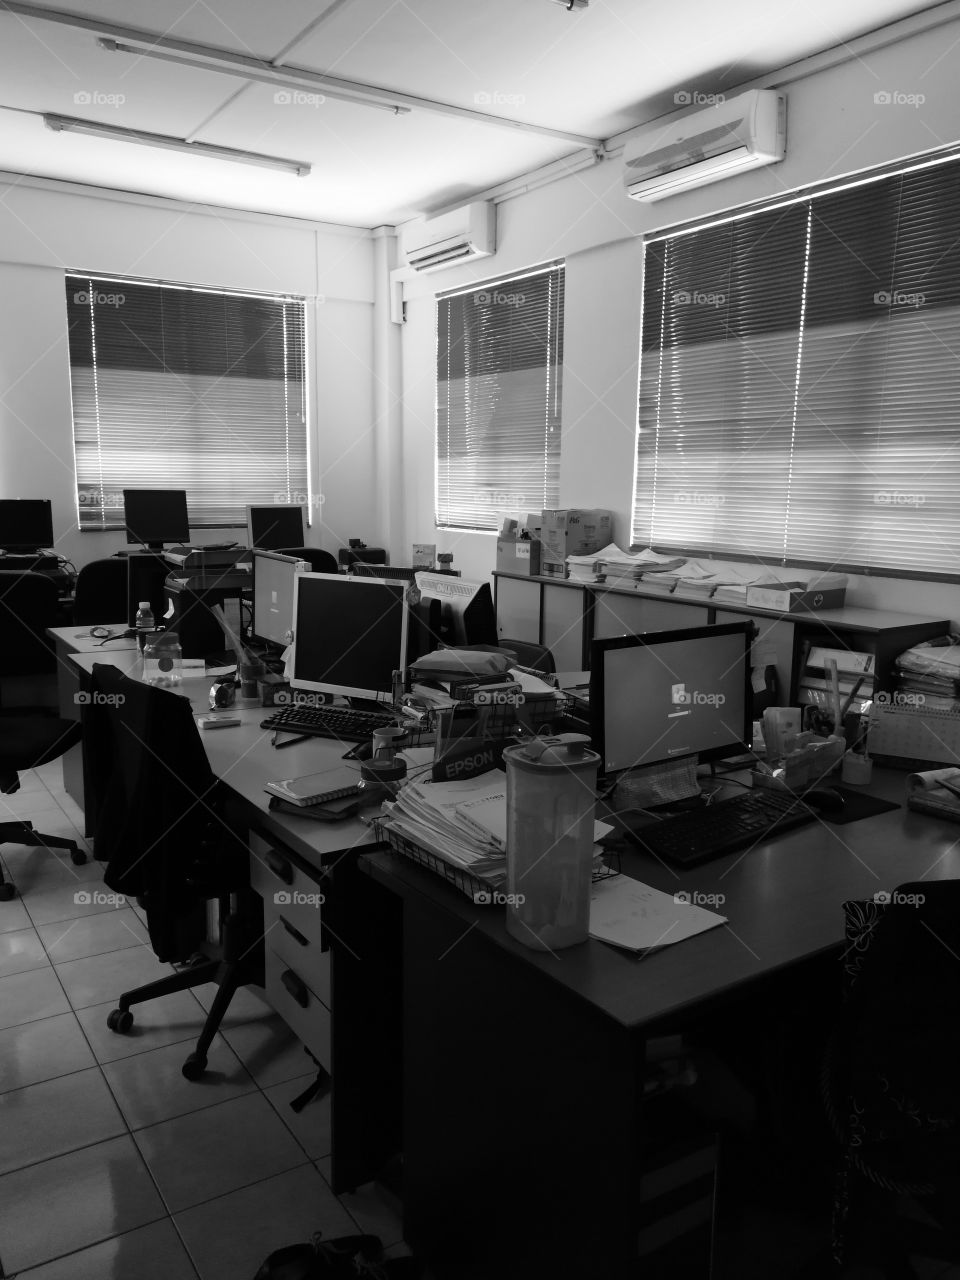 A view inside my office in mono